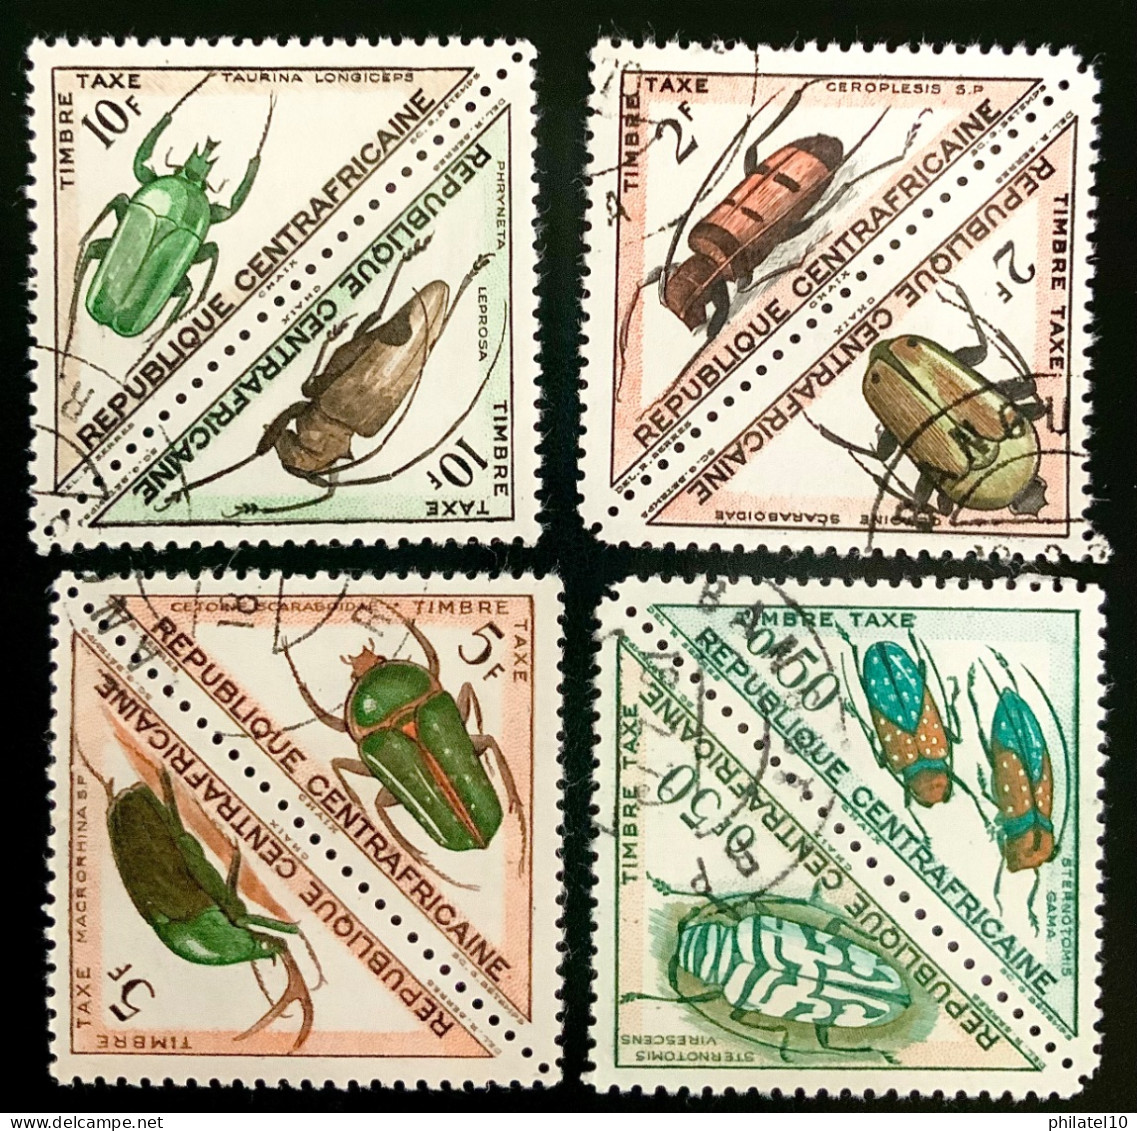 1962 REPUBLIQUE CENTRAFRICAINE- TIMBRES TAXES INSECTES - OBLITERE - Centrafricaine (République)